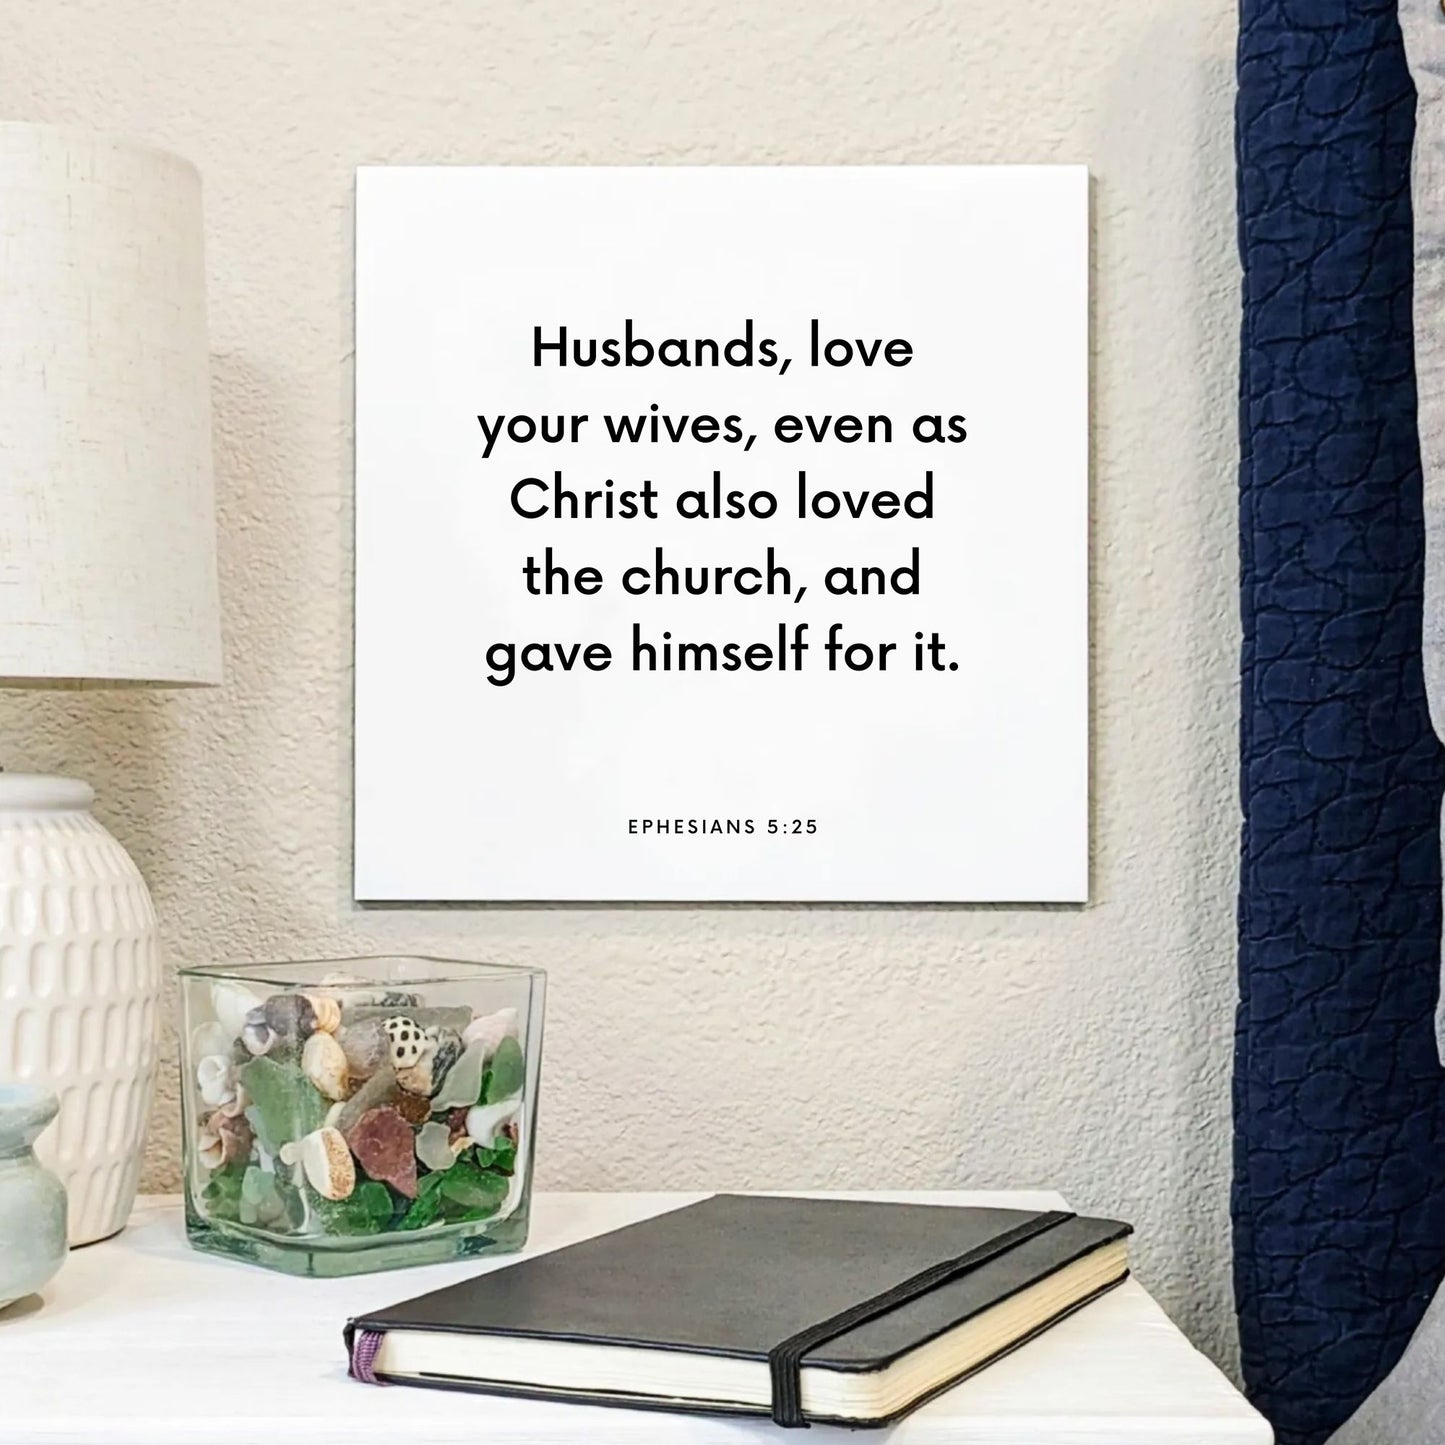 Bedside mouting of the scripture tile for Ephesians 5:25 - "Husbands, love your wives, even as Christ loved the church"